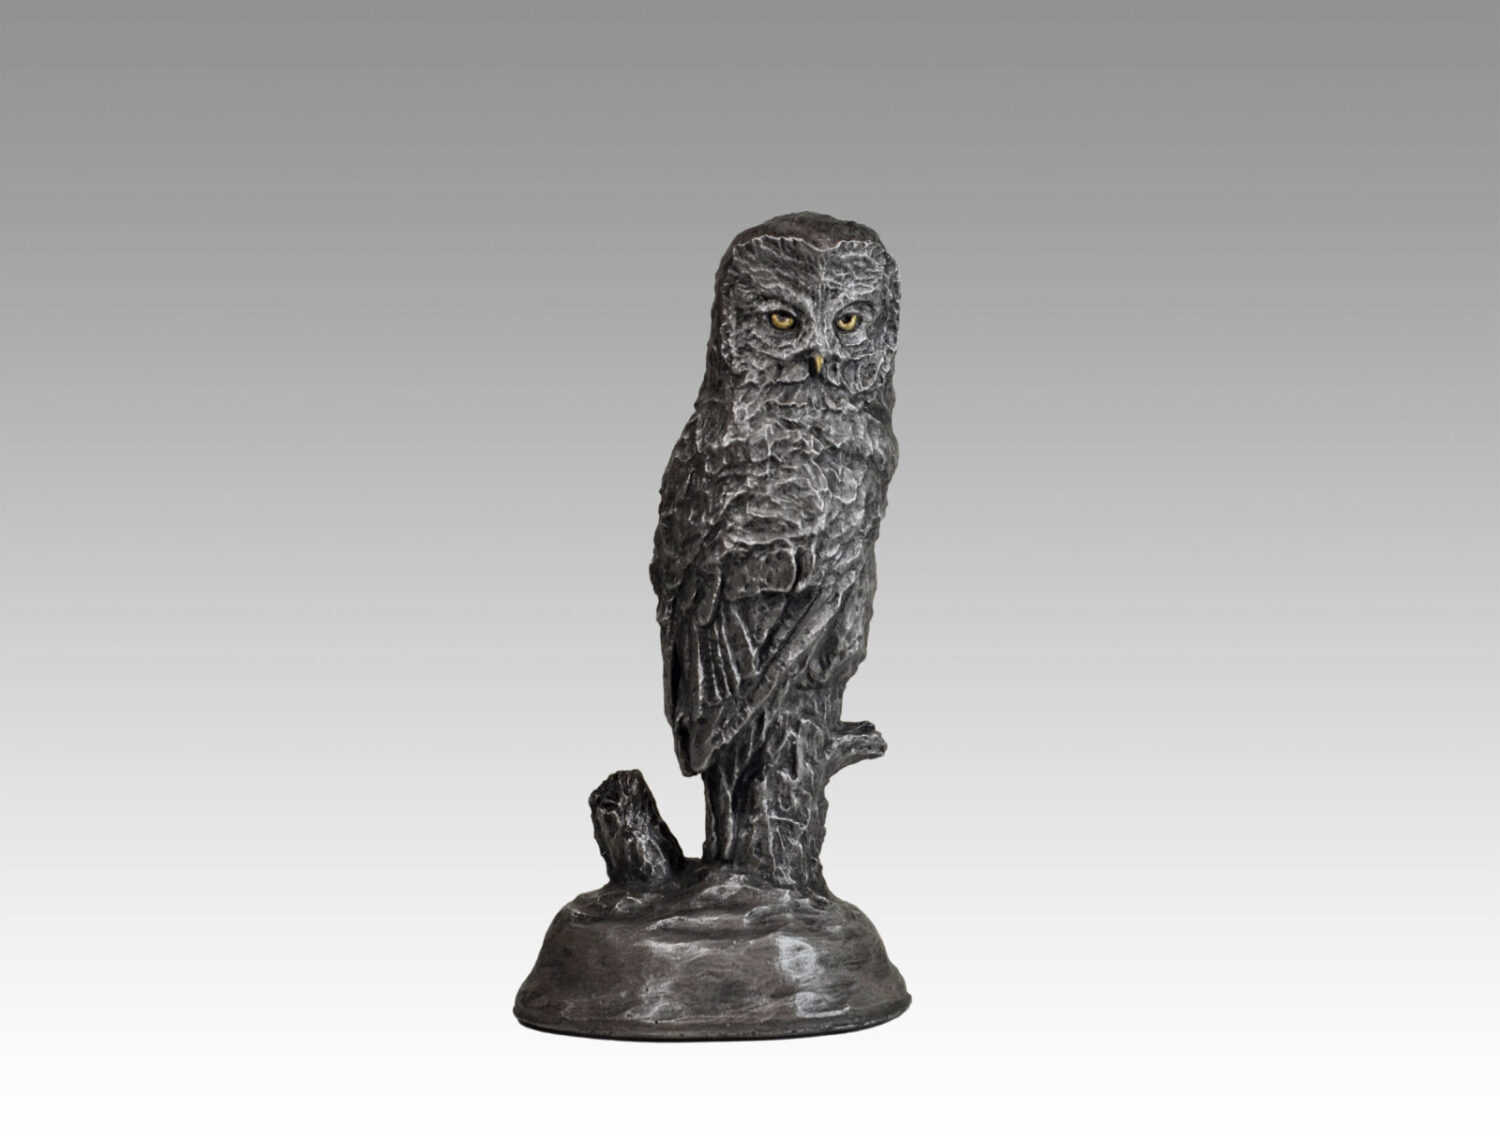 Gallery, Grey Ghost, $275 CAD, Metal Infused, 11” H, Edition 60, Moonlit Ore Finish, Wildlife Sculpture of a grey owl, Sculptor Tyler Fauvelle